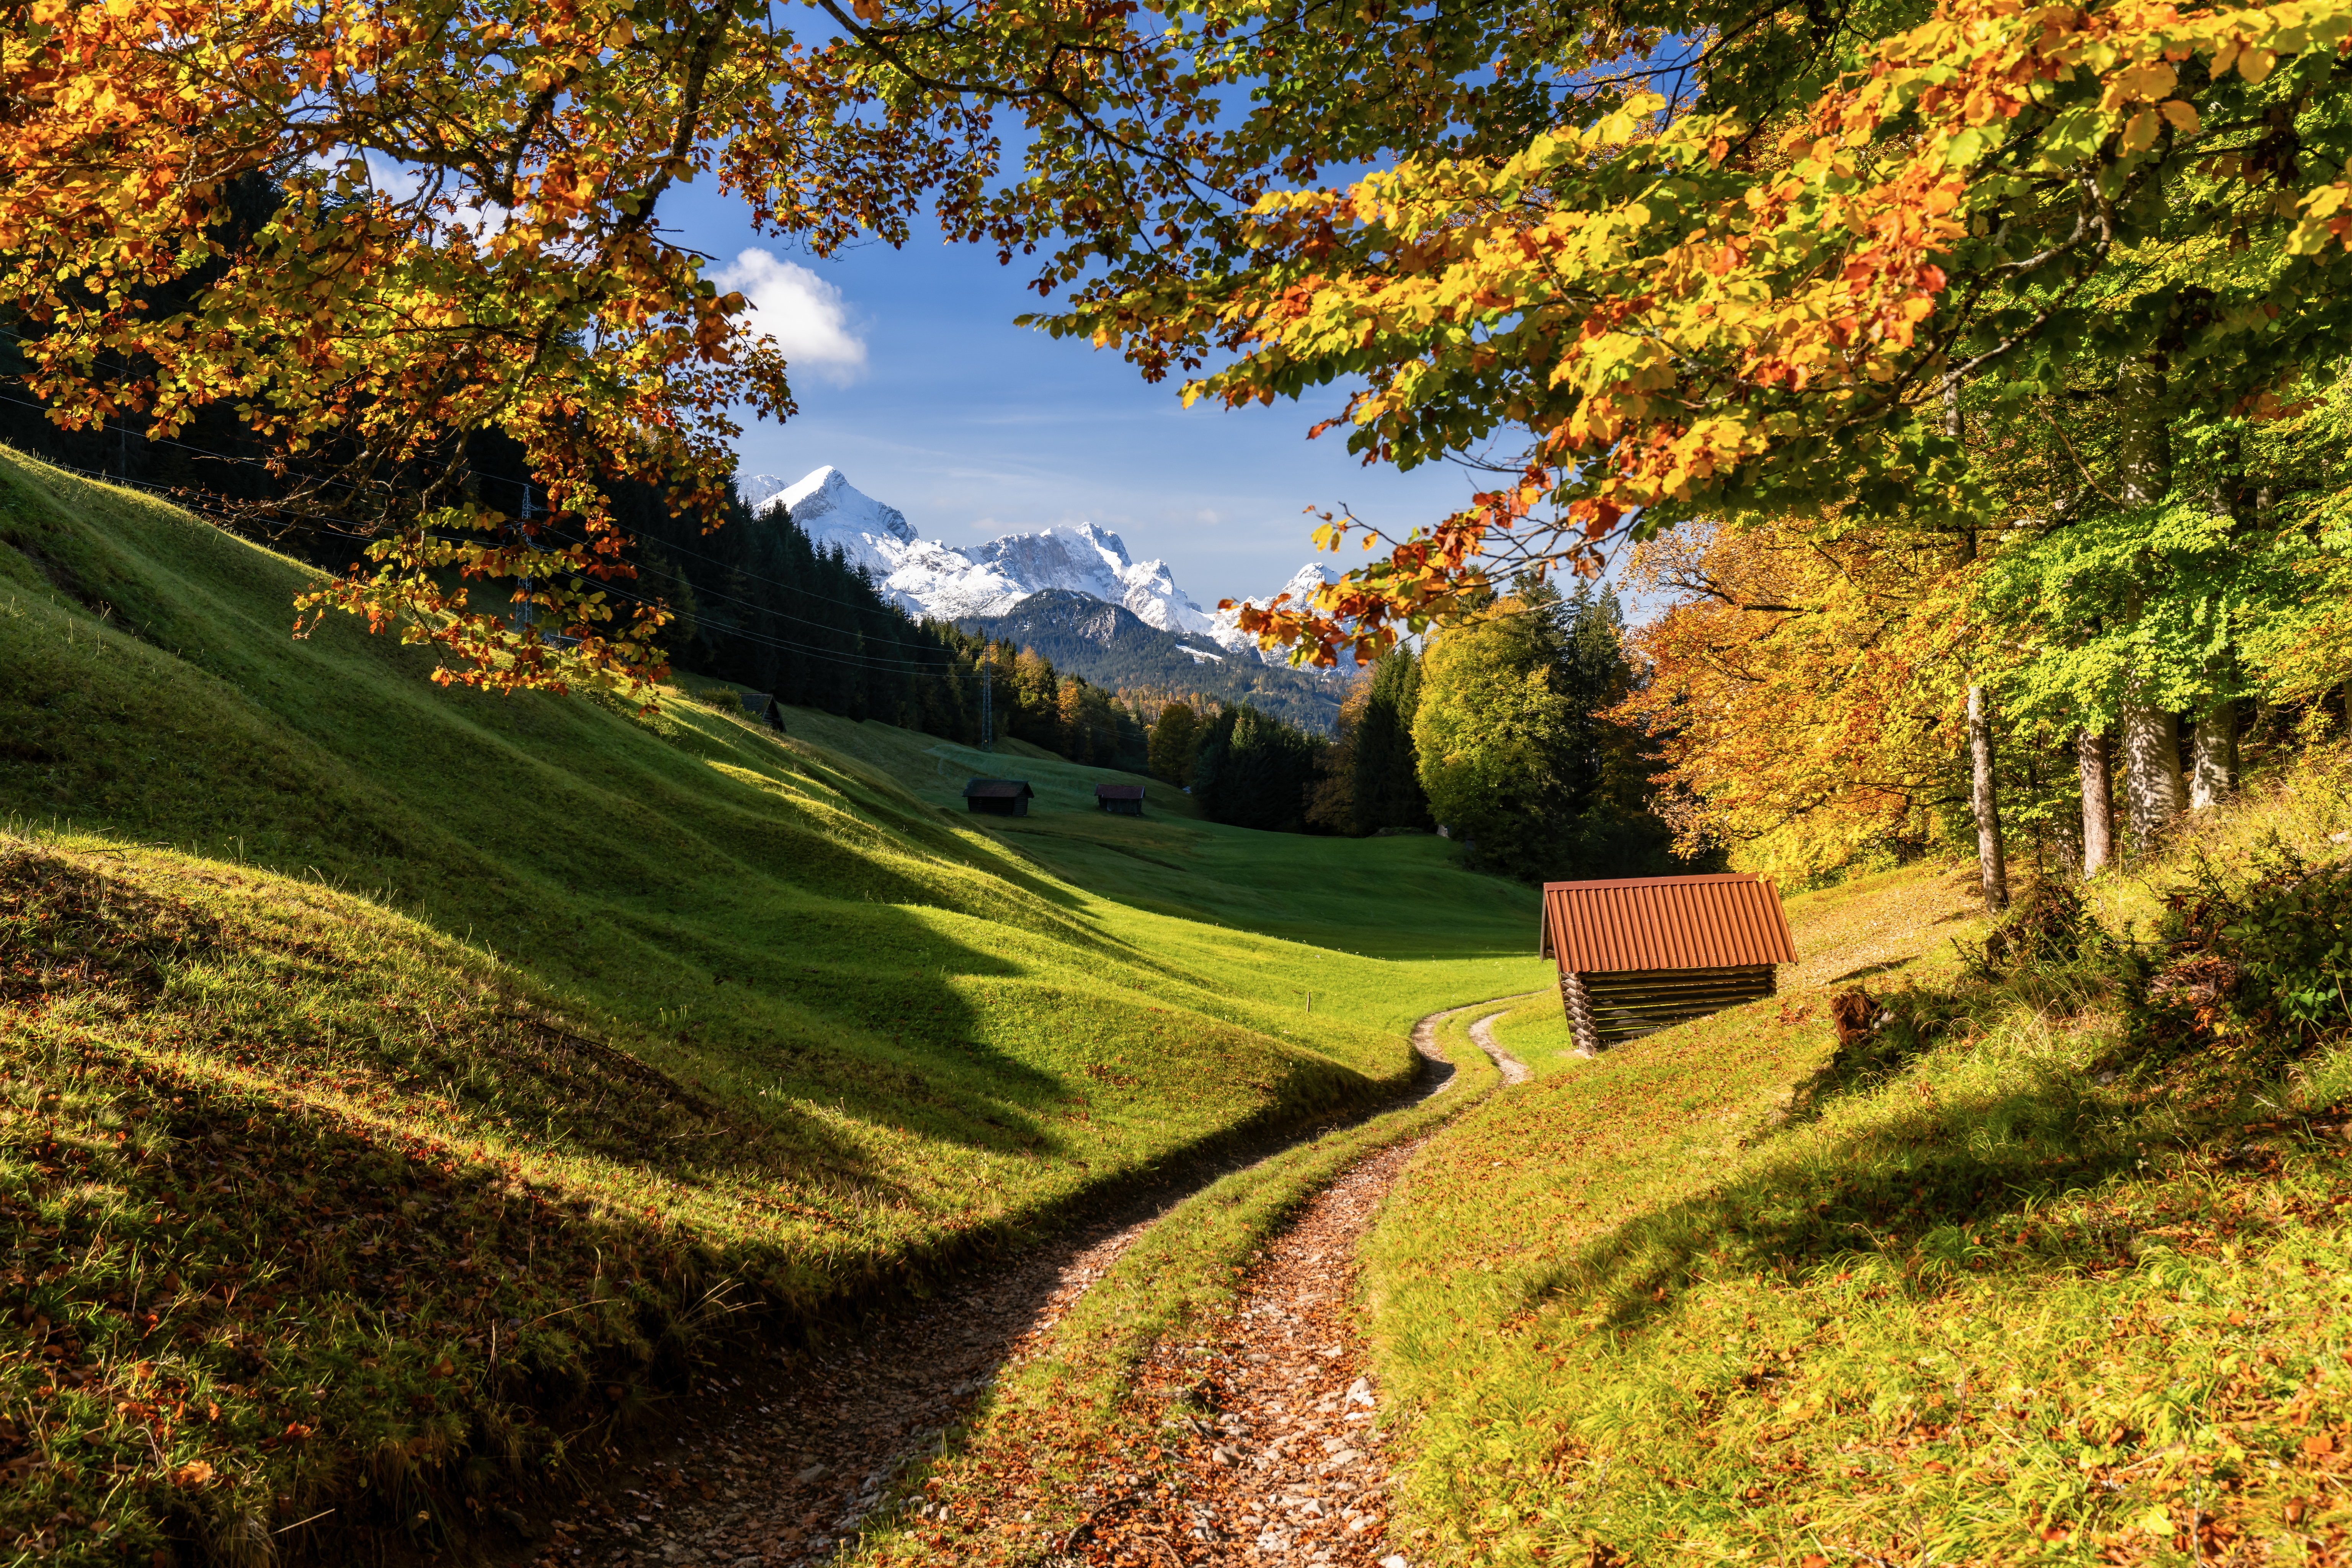 Nature Landscape Trees Dirt Road Fall Cabin Mountains Leaves Snowy Peak Grass Hill Forest Bavaria Ge 6144x4096